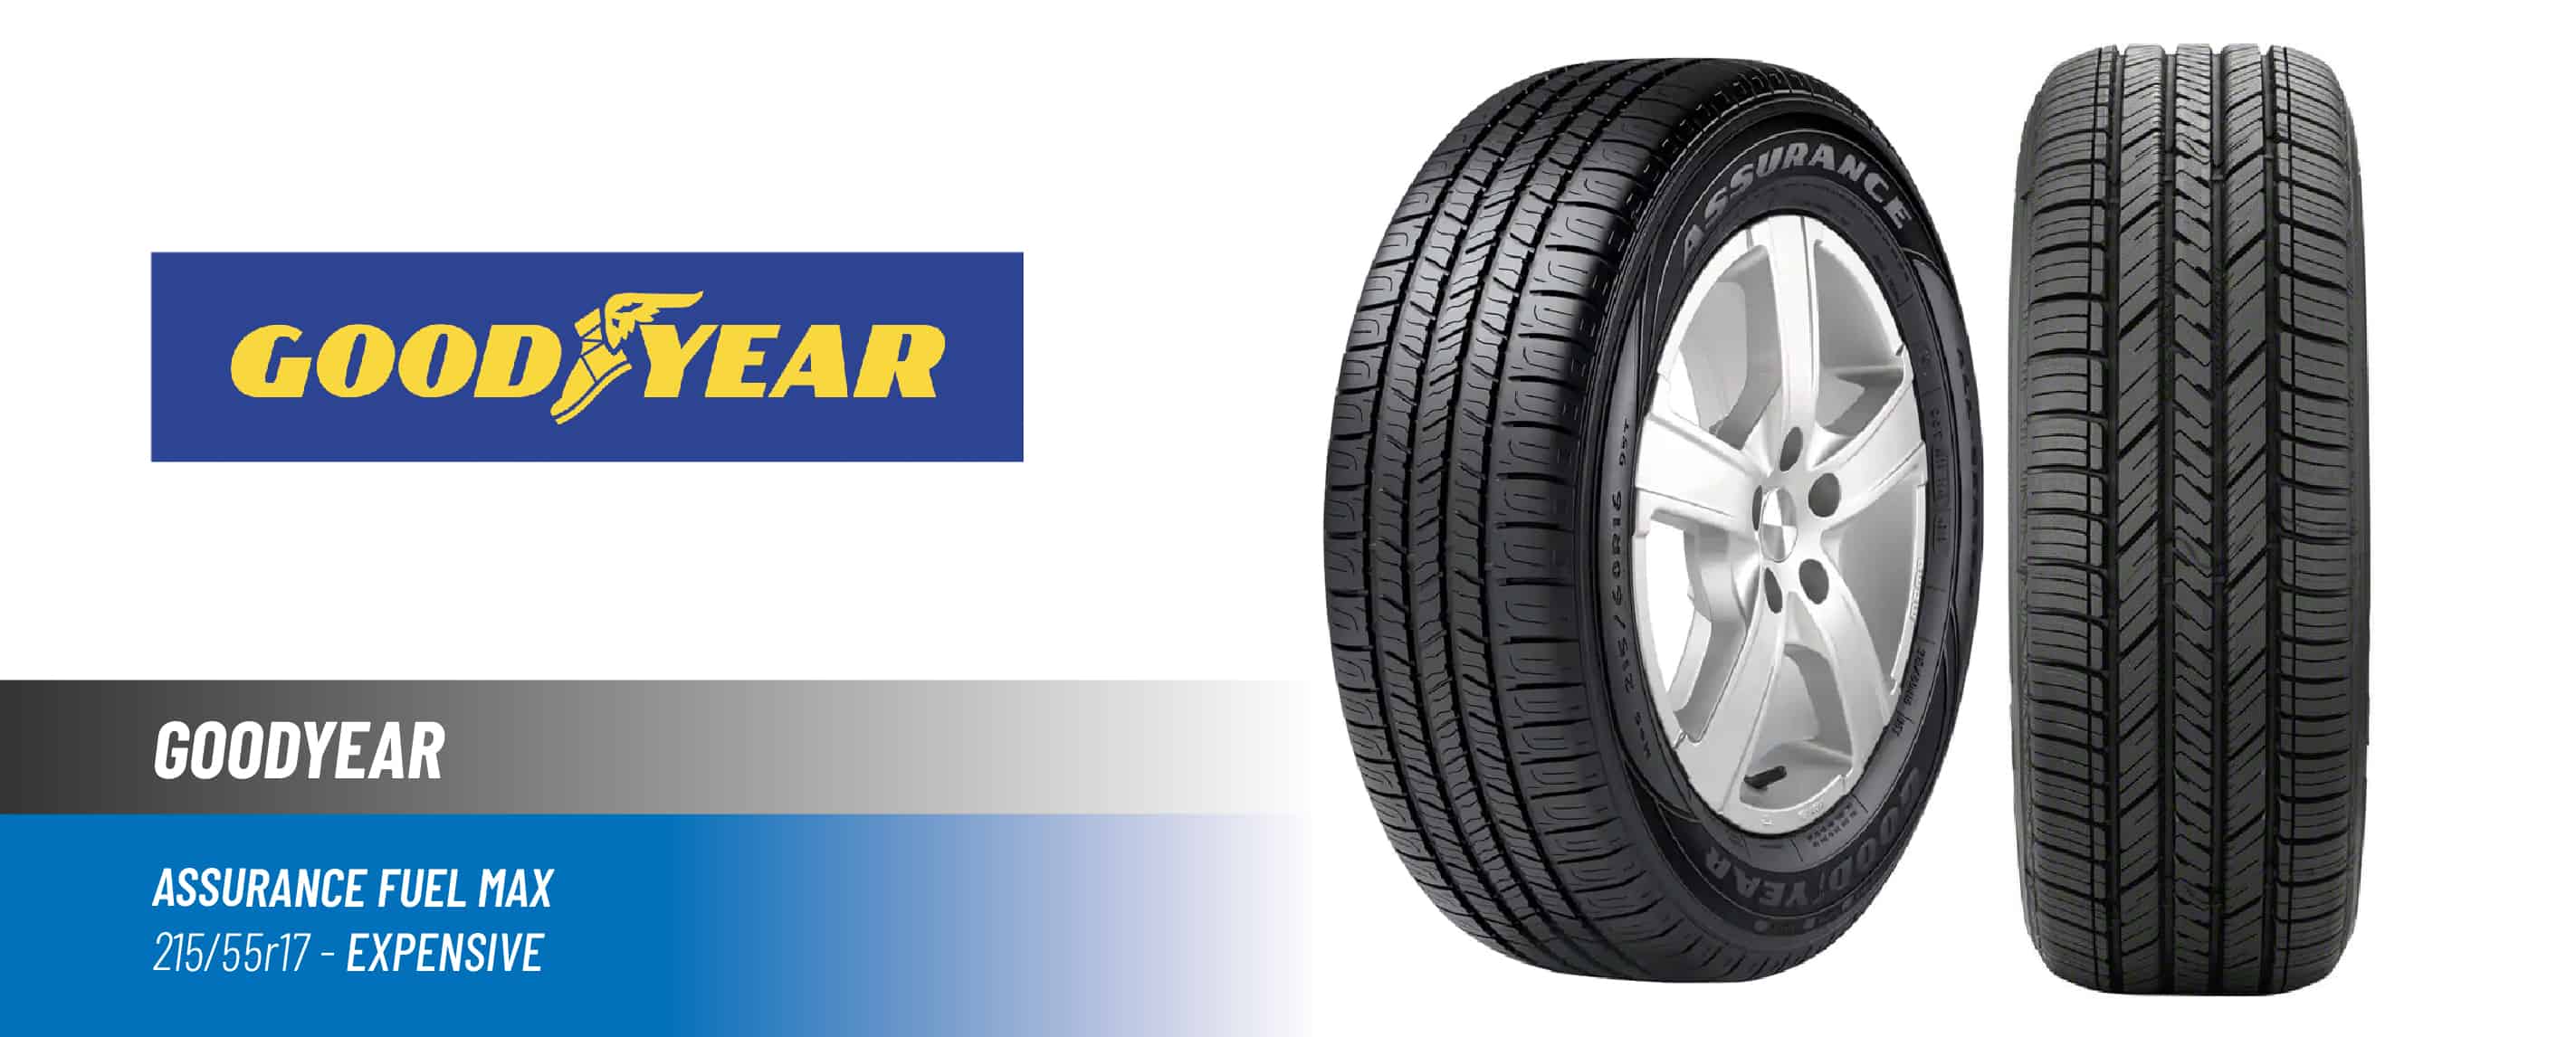 Top#3 High Price: Goodyear Assurance Fuel Max –best 215 55r17